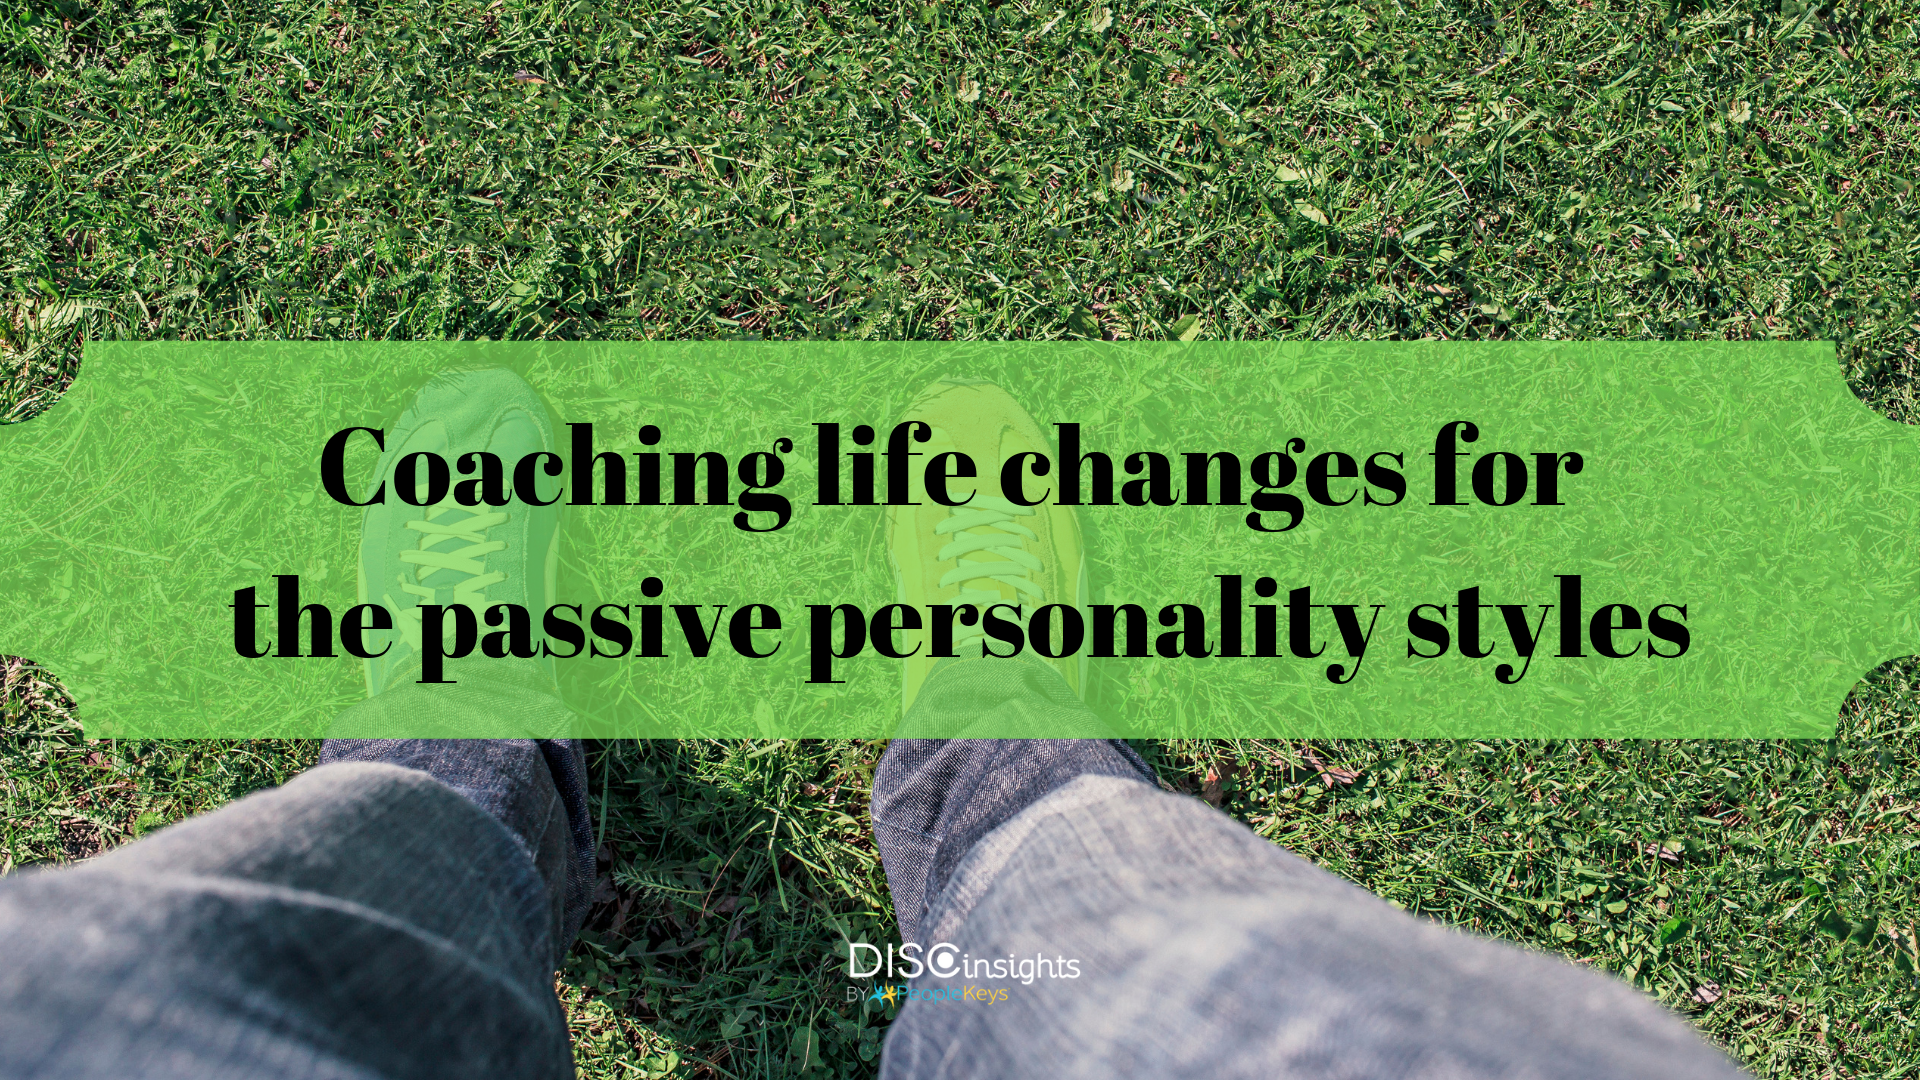 Coaching life changes for the passive personality styles